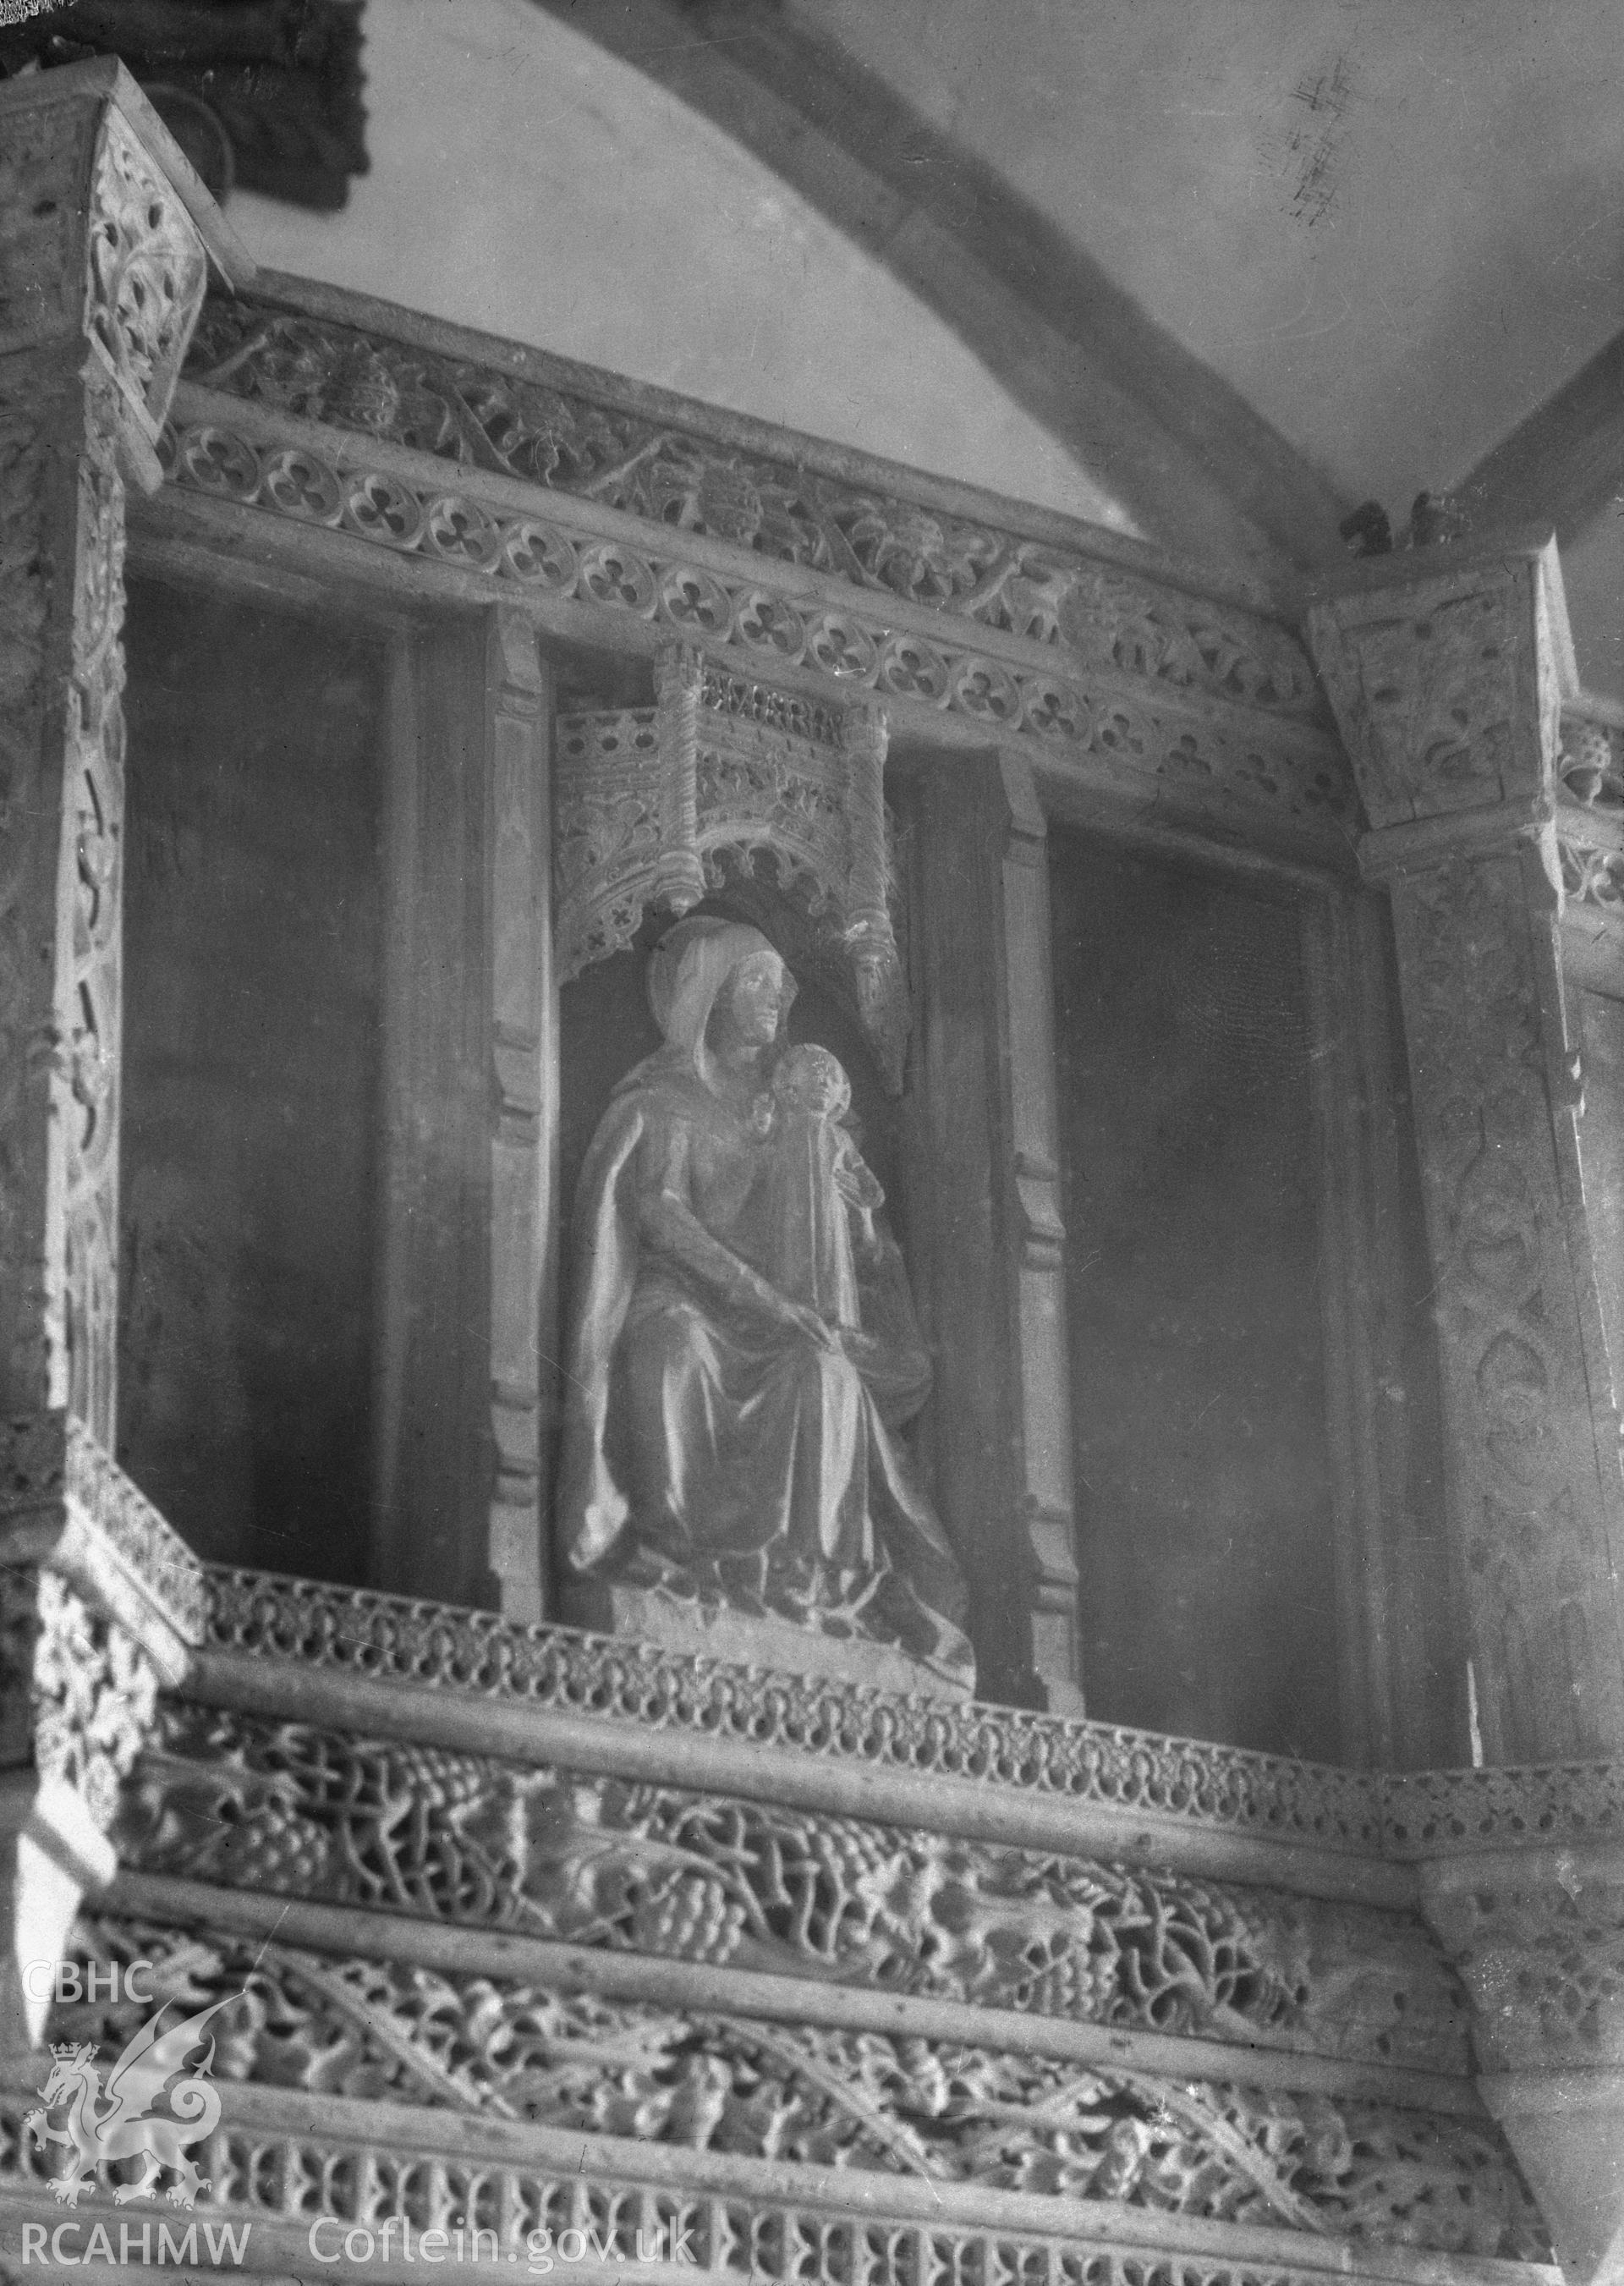 View of the Madonna and child statue above the screen in Llanfilo Church, Brecon. taken by W A Call circa 1920.